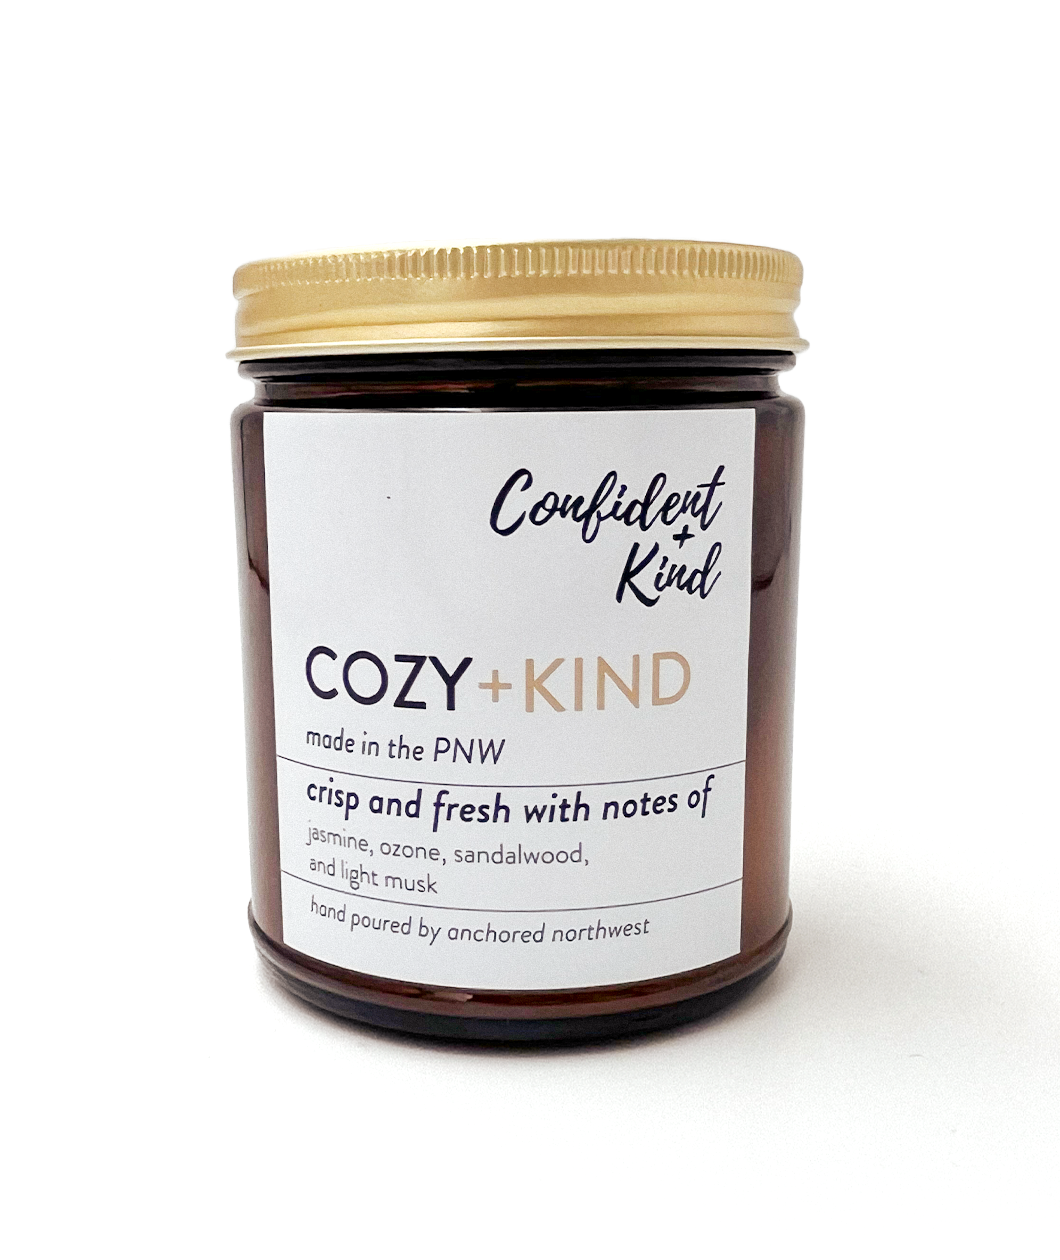 Cozy & Kind Candle